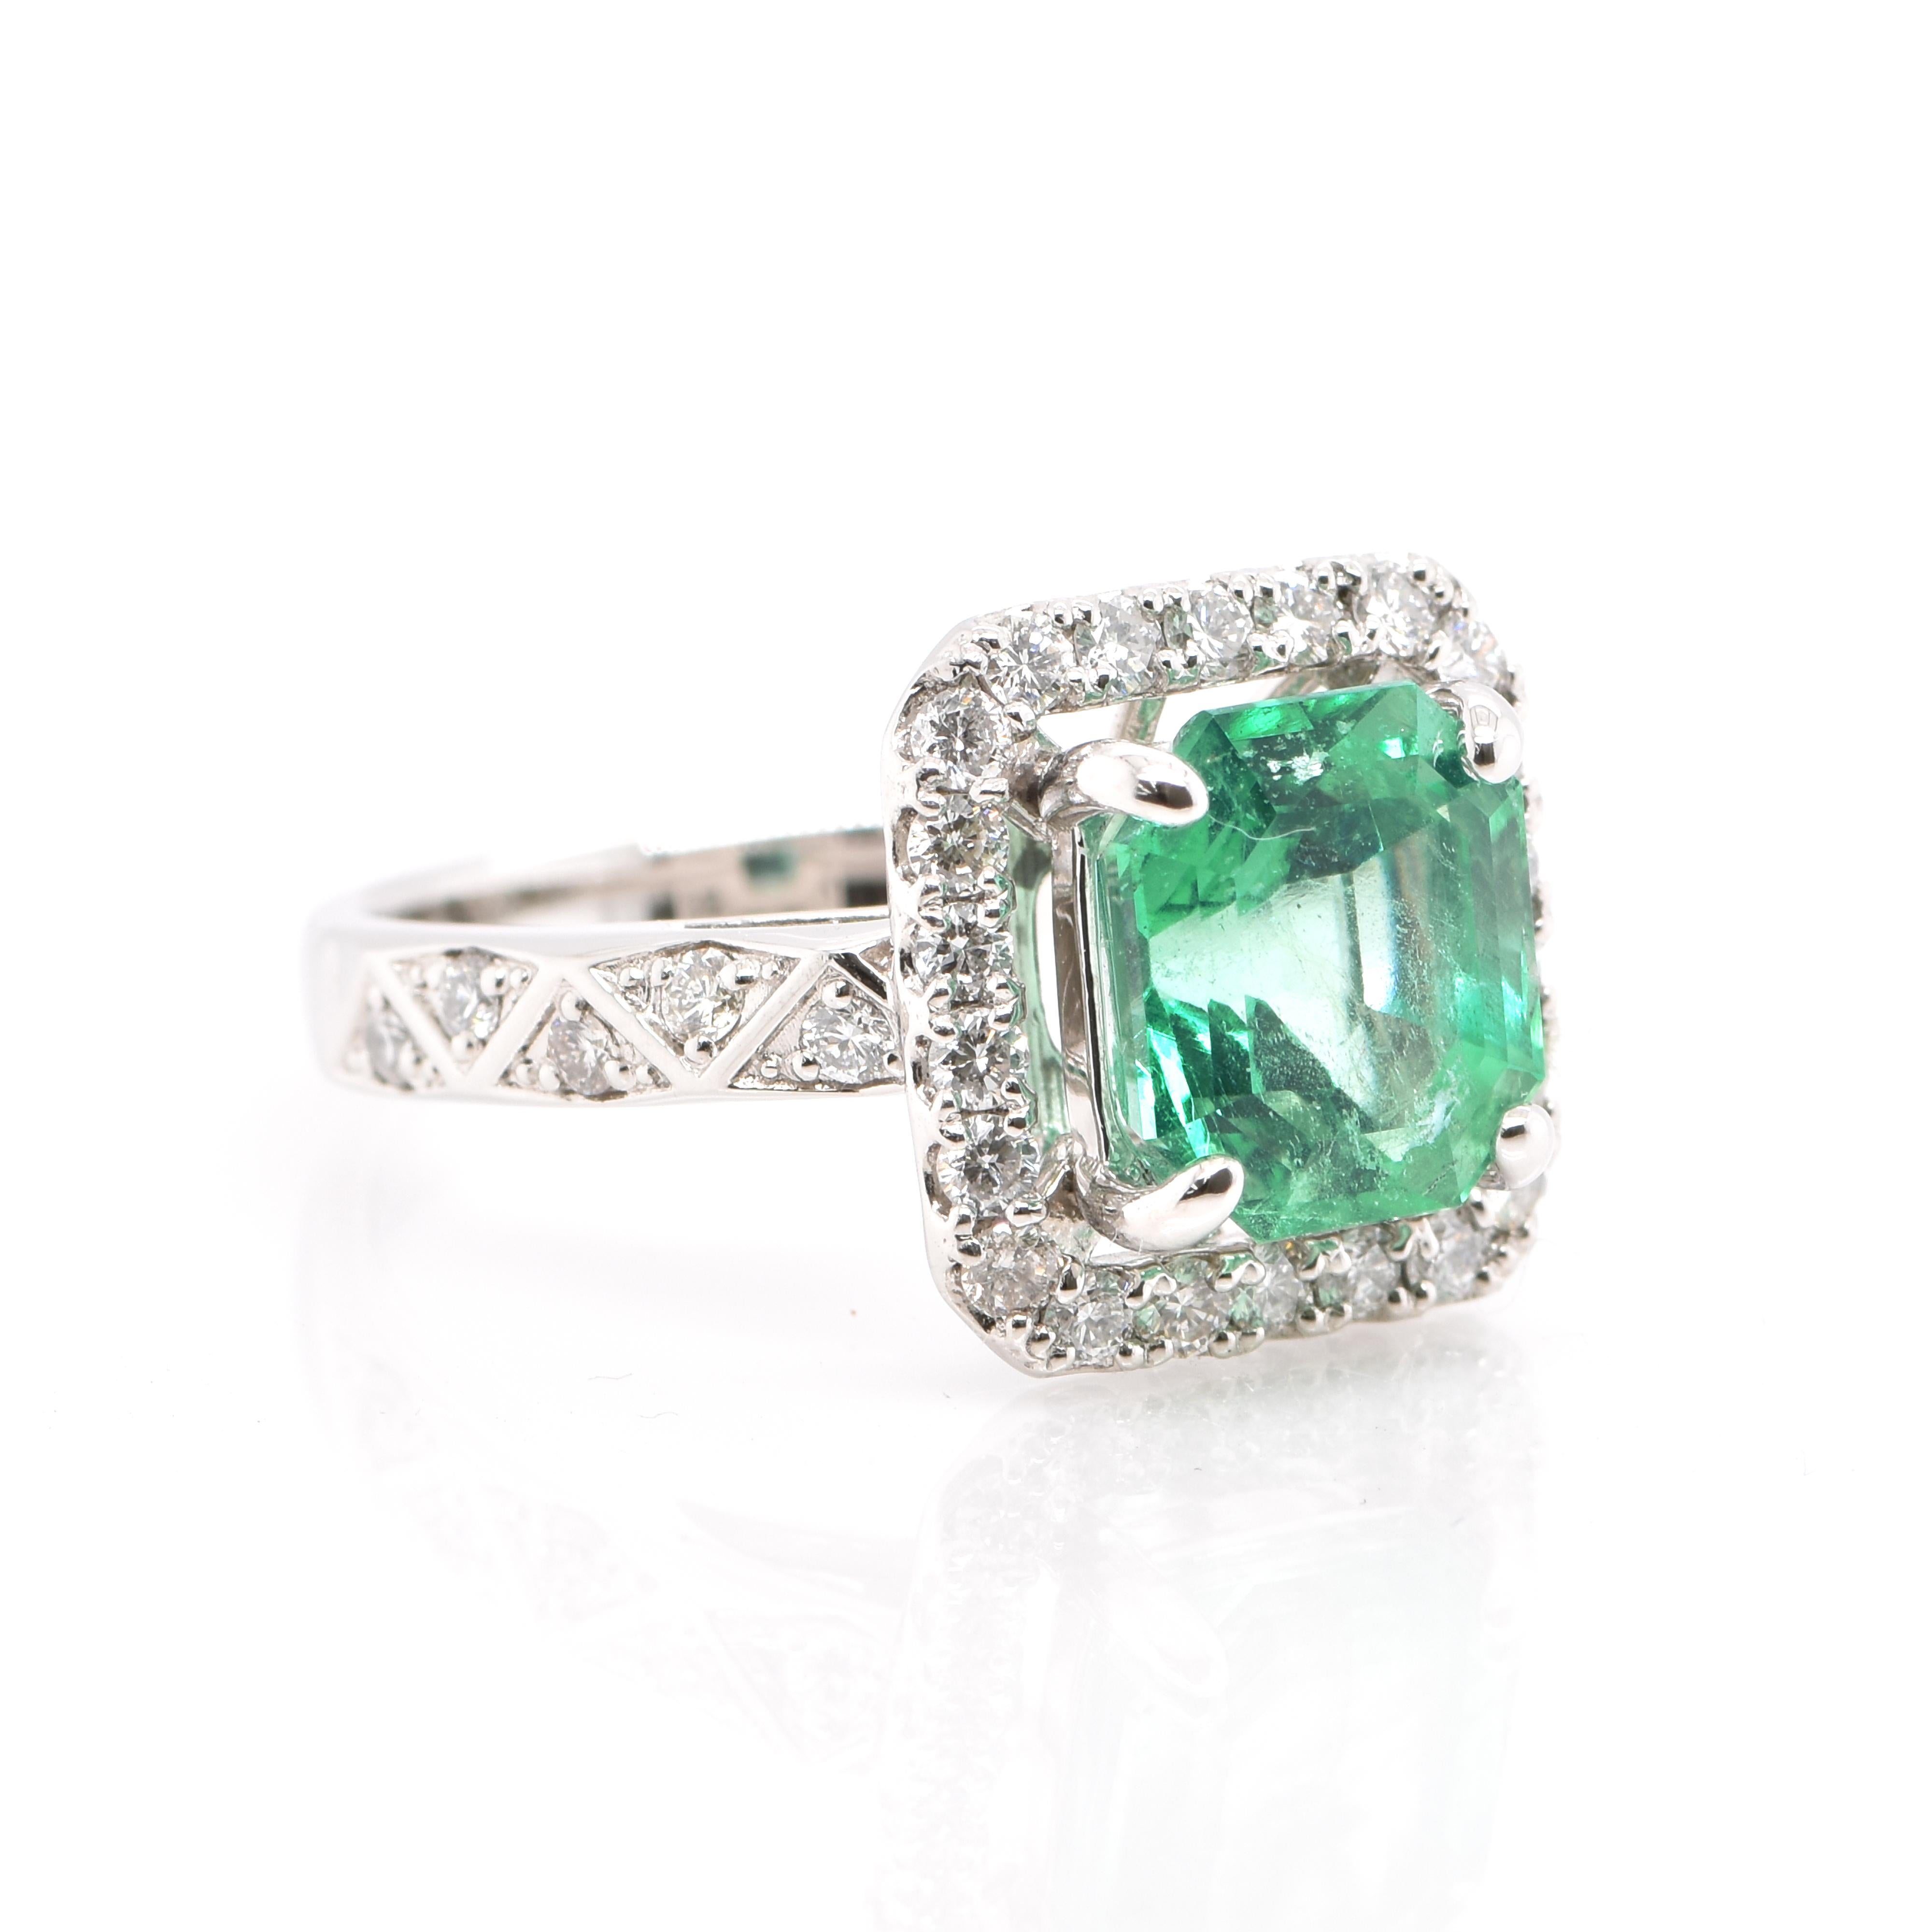 Modern 2.48 Carat, Natural, Colombian Emerald and Diamond Ring Set in Platinum